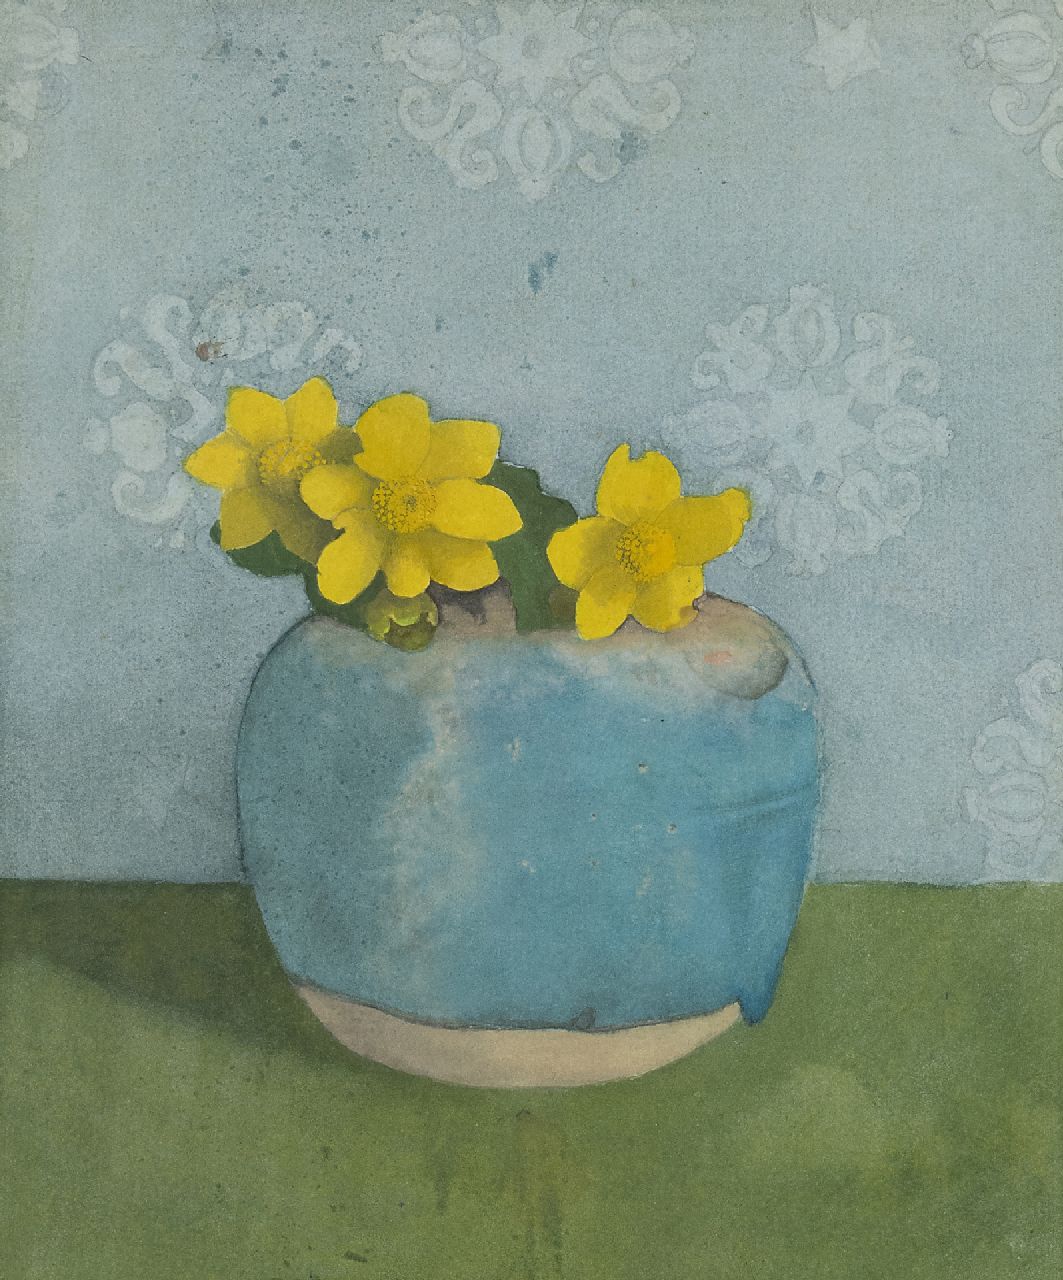 Voerman sr. J.  | Jan Voerman sr. | Watercolours and drawings offered for sale | Marsh-marigolds in a ginger jar, watercolour on paper 25.0 x 20.5 cm, painted in the 1890's